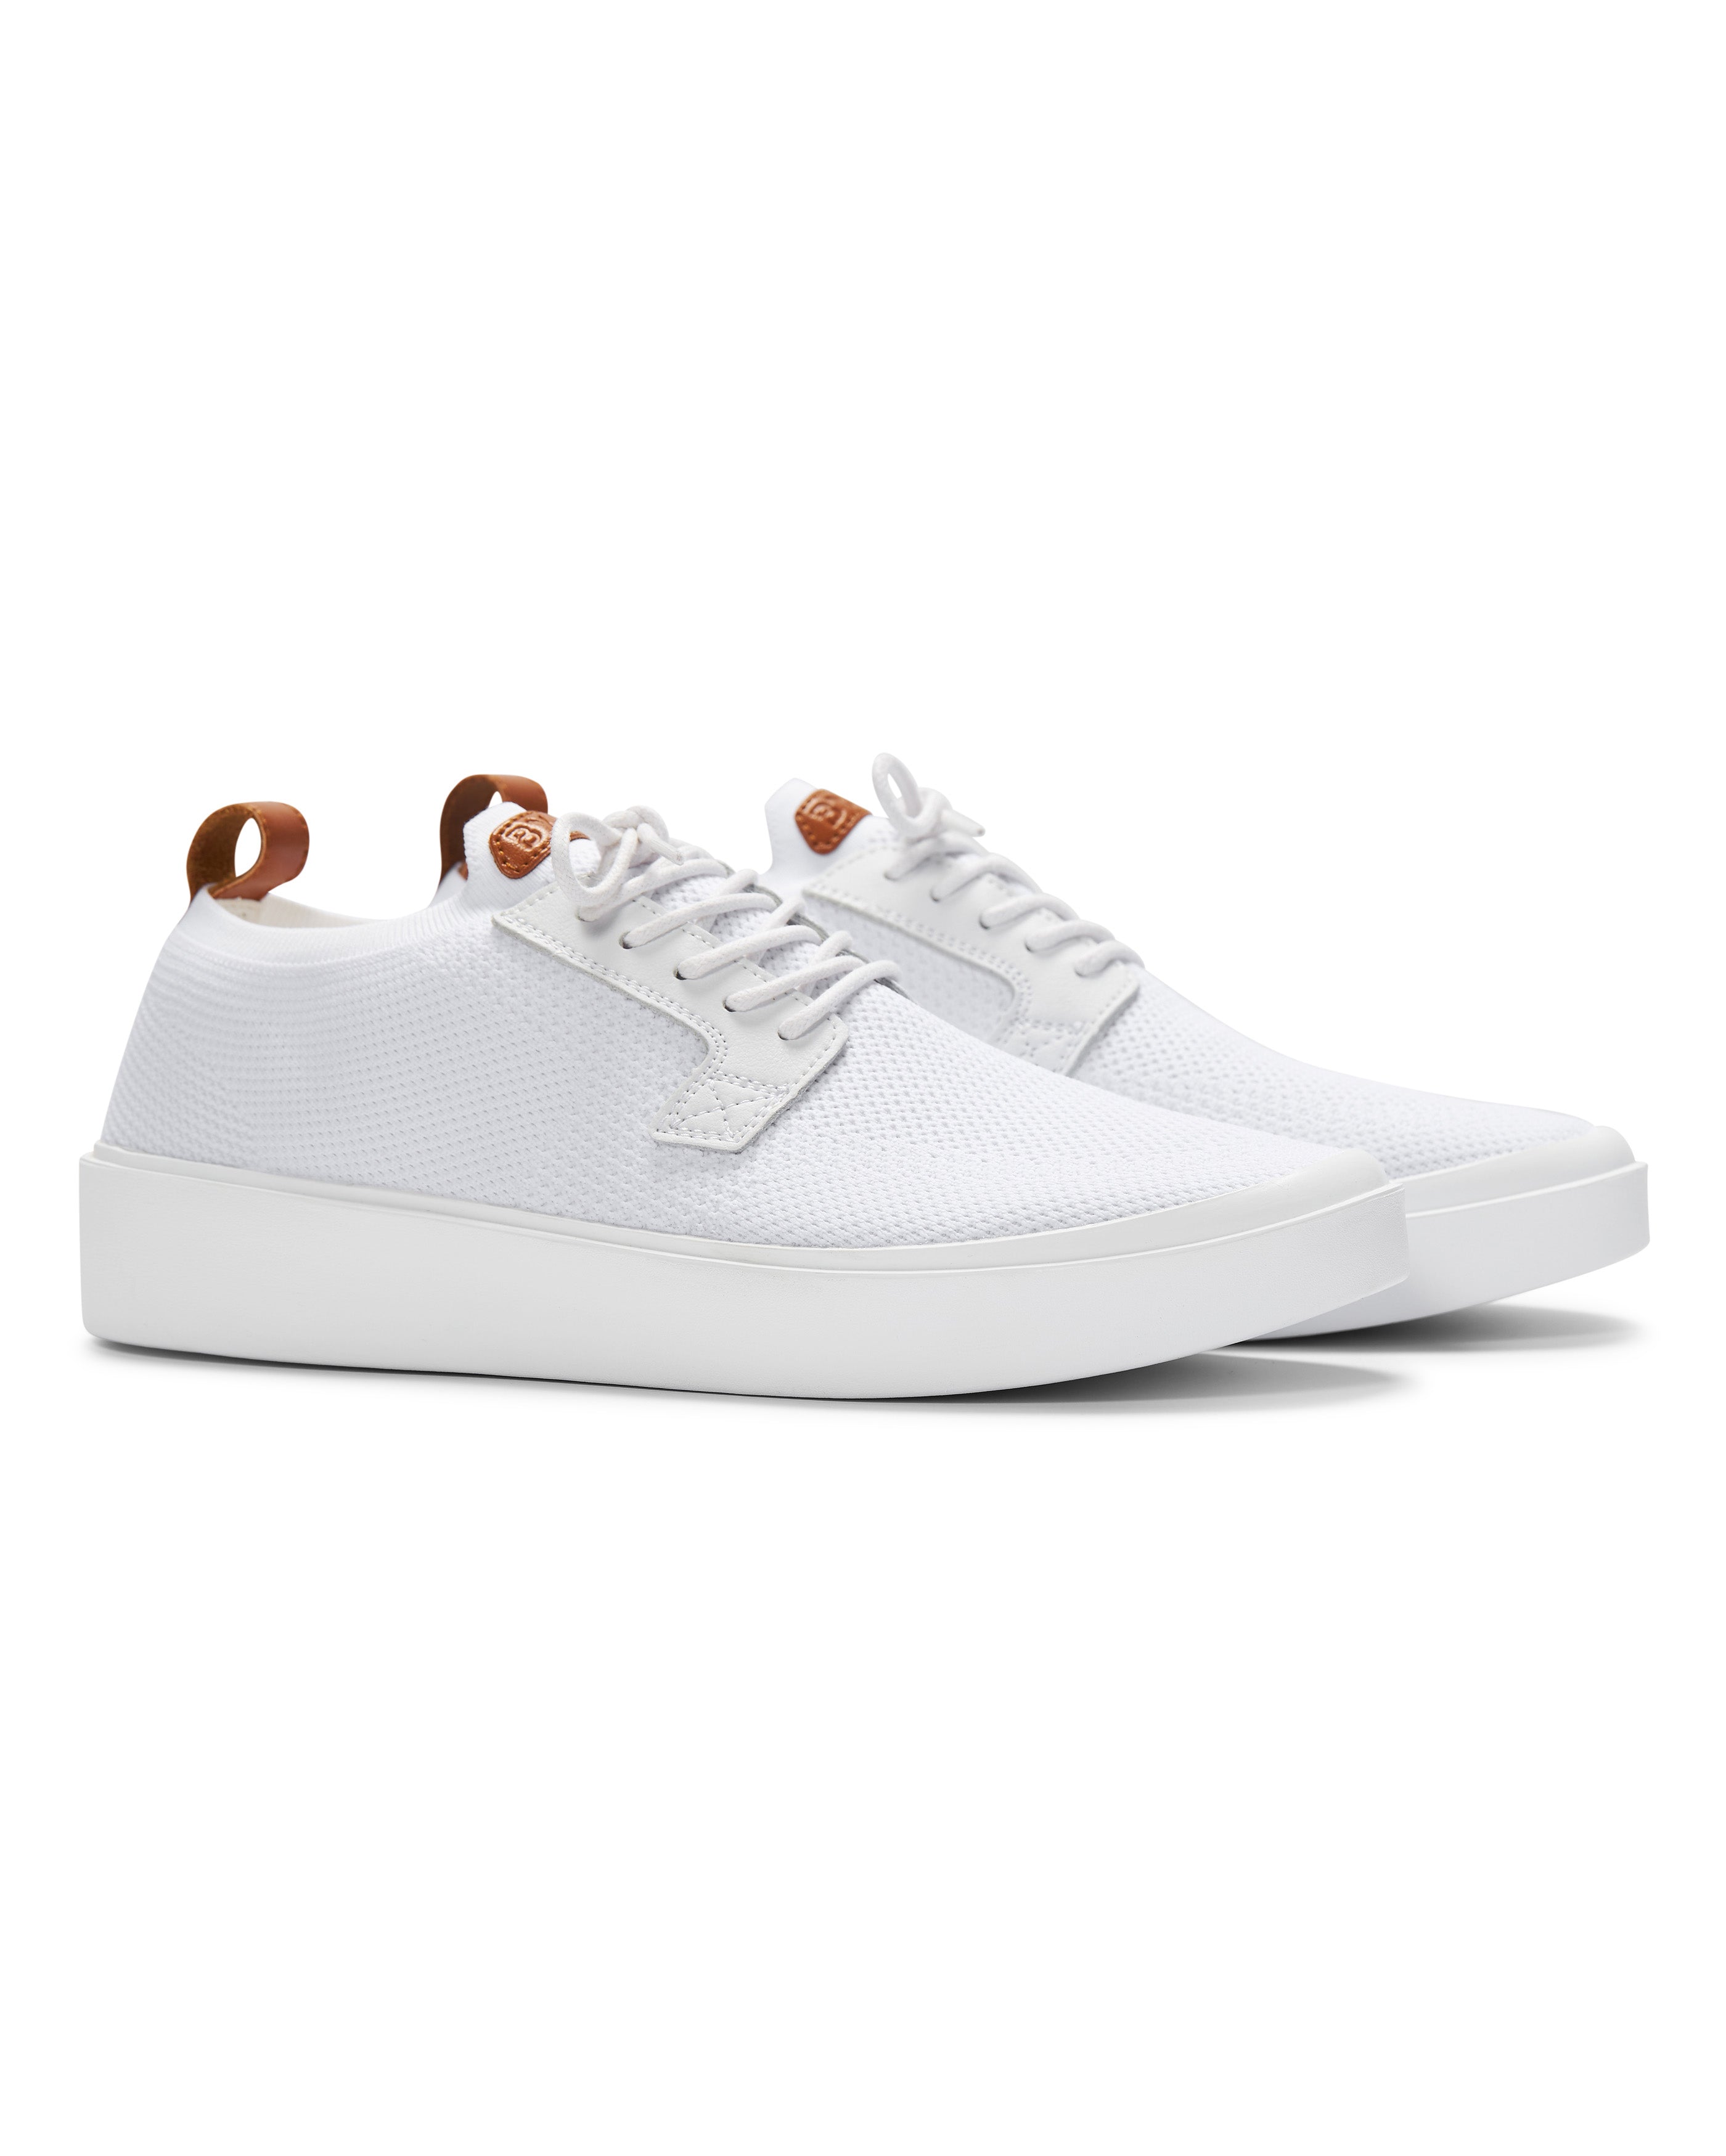 Buy GUCCI BEE PREMIUM QUALITY WHITE SNEAKER MEN'S CASUAL SHOES - Online